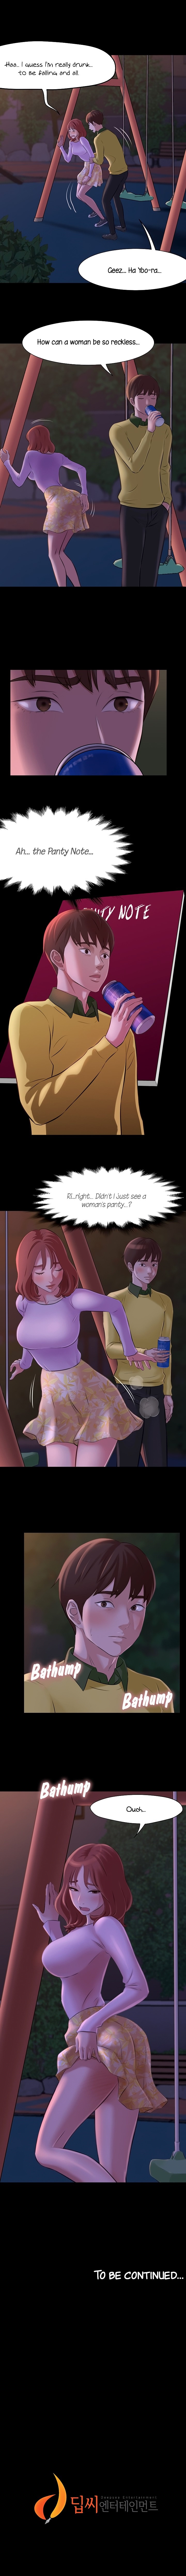 Panty Note - Chapter 1 Page 12